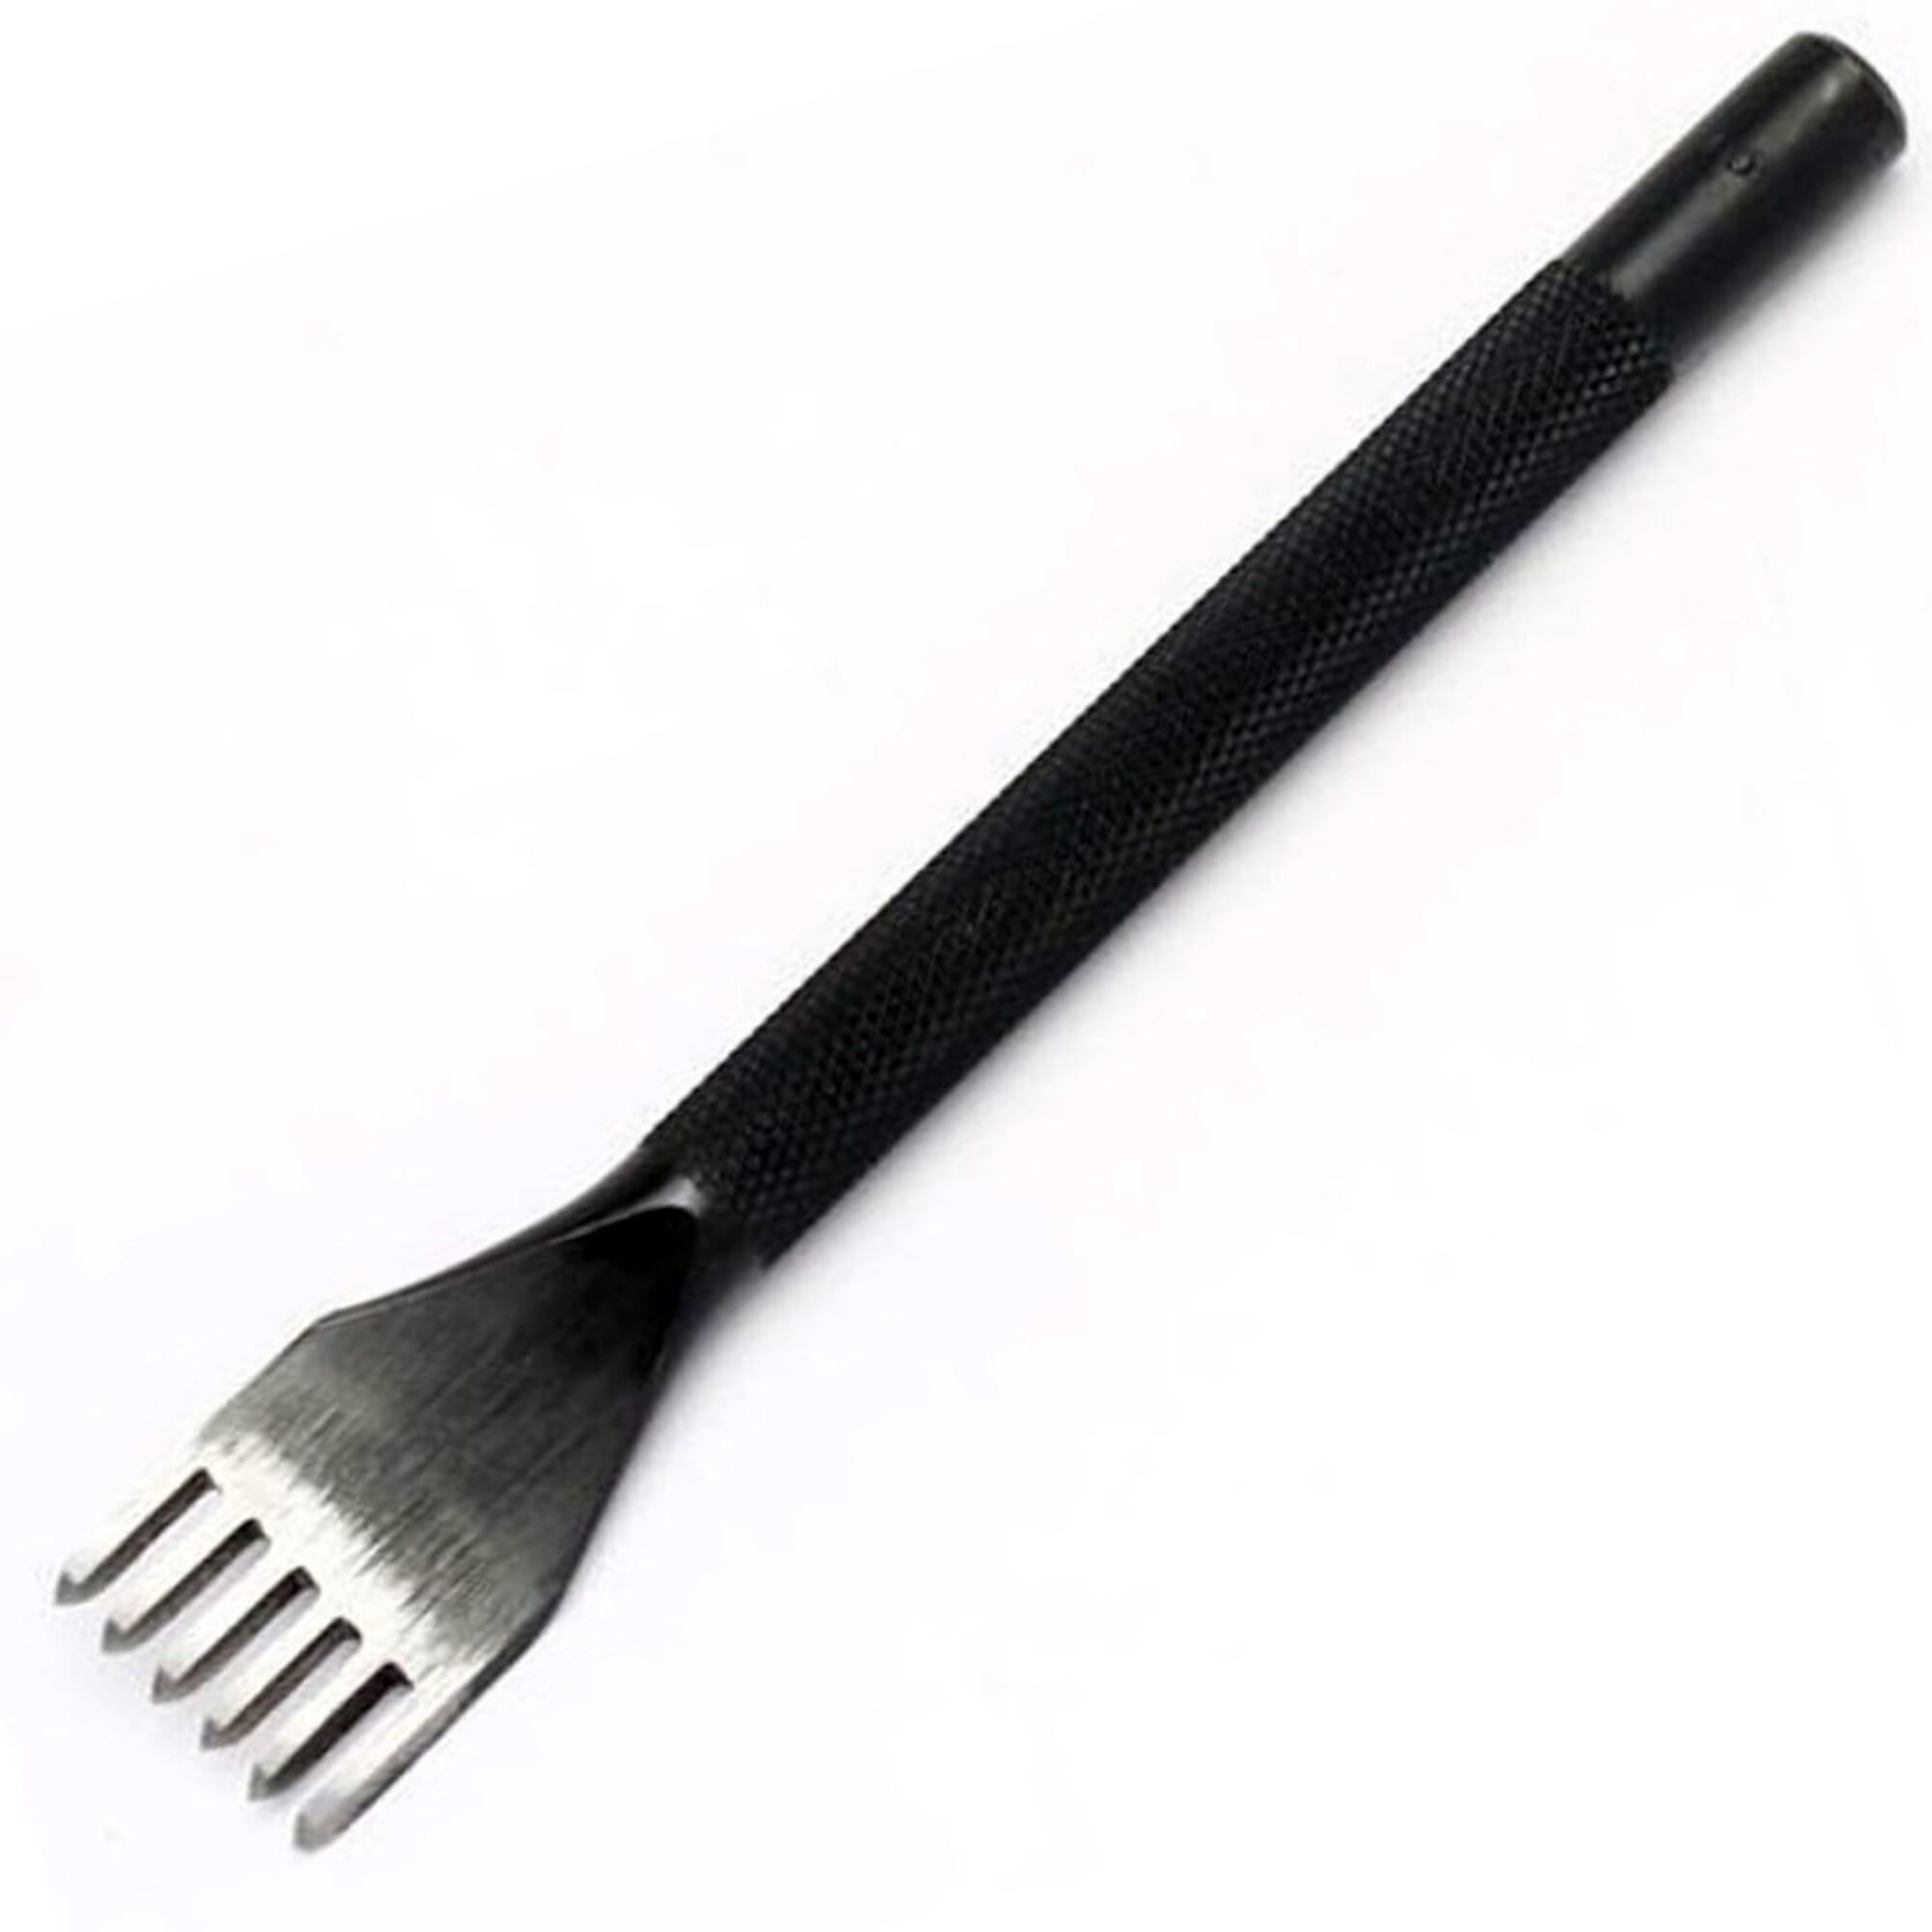 1pc Black Striped Cutlery Holder With Drain Board And Knife Stand